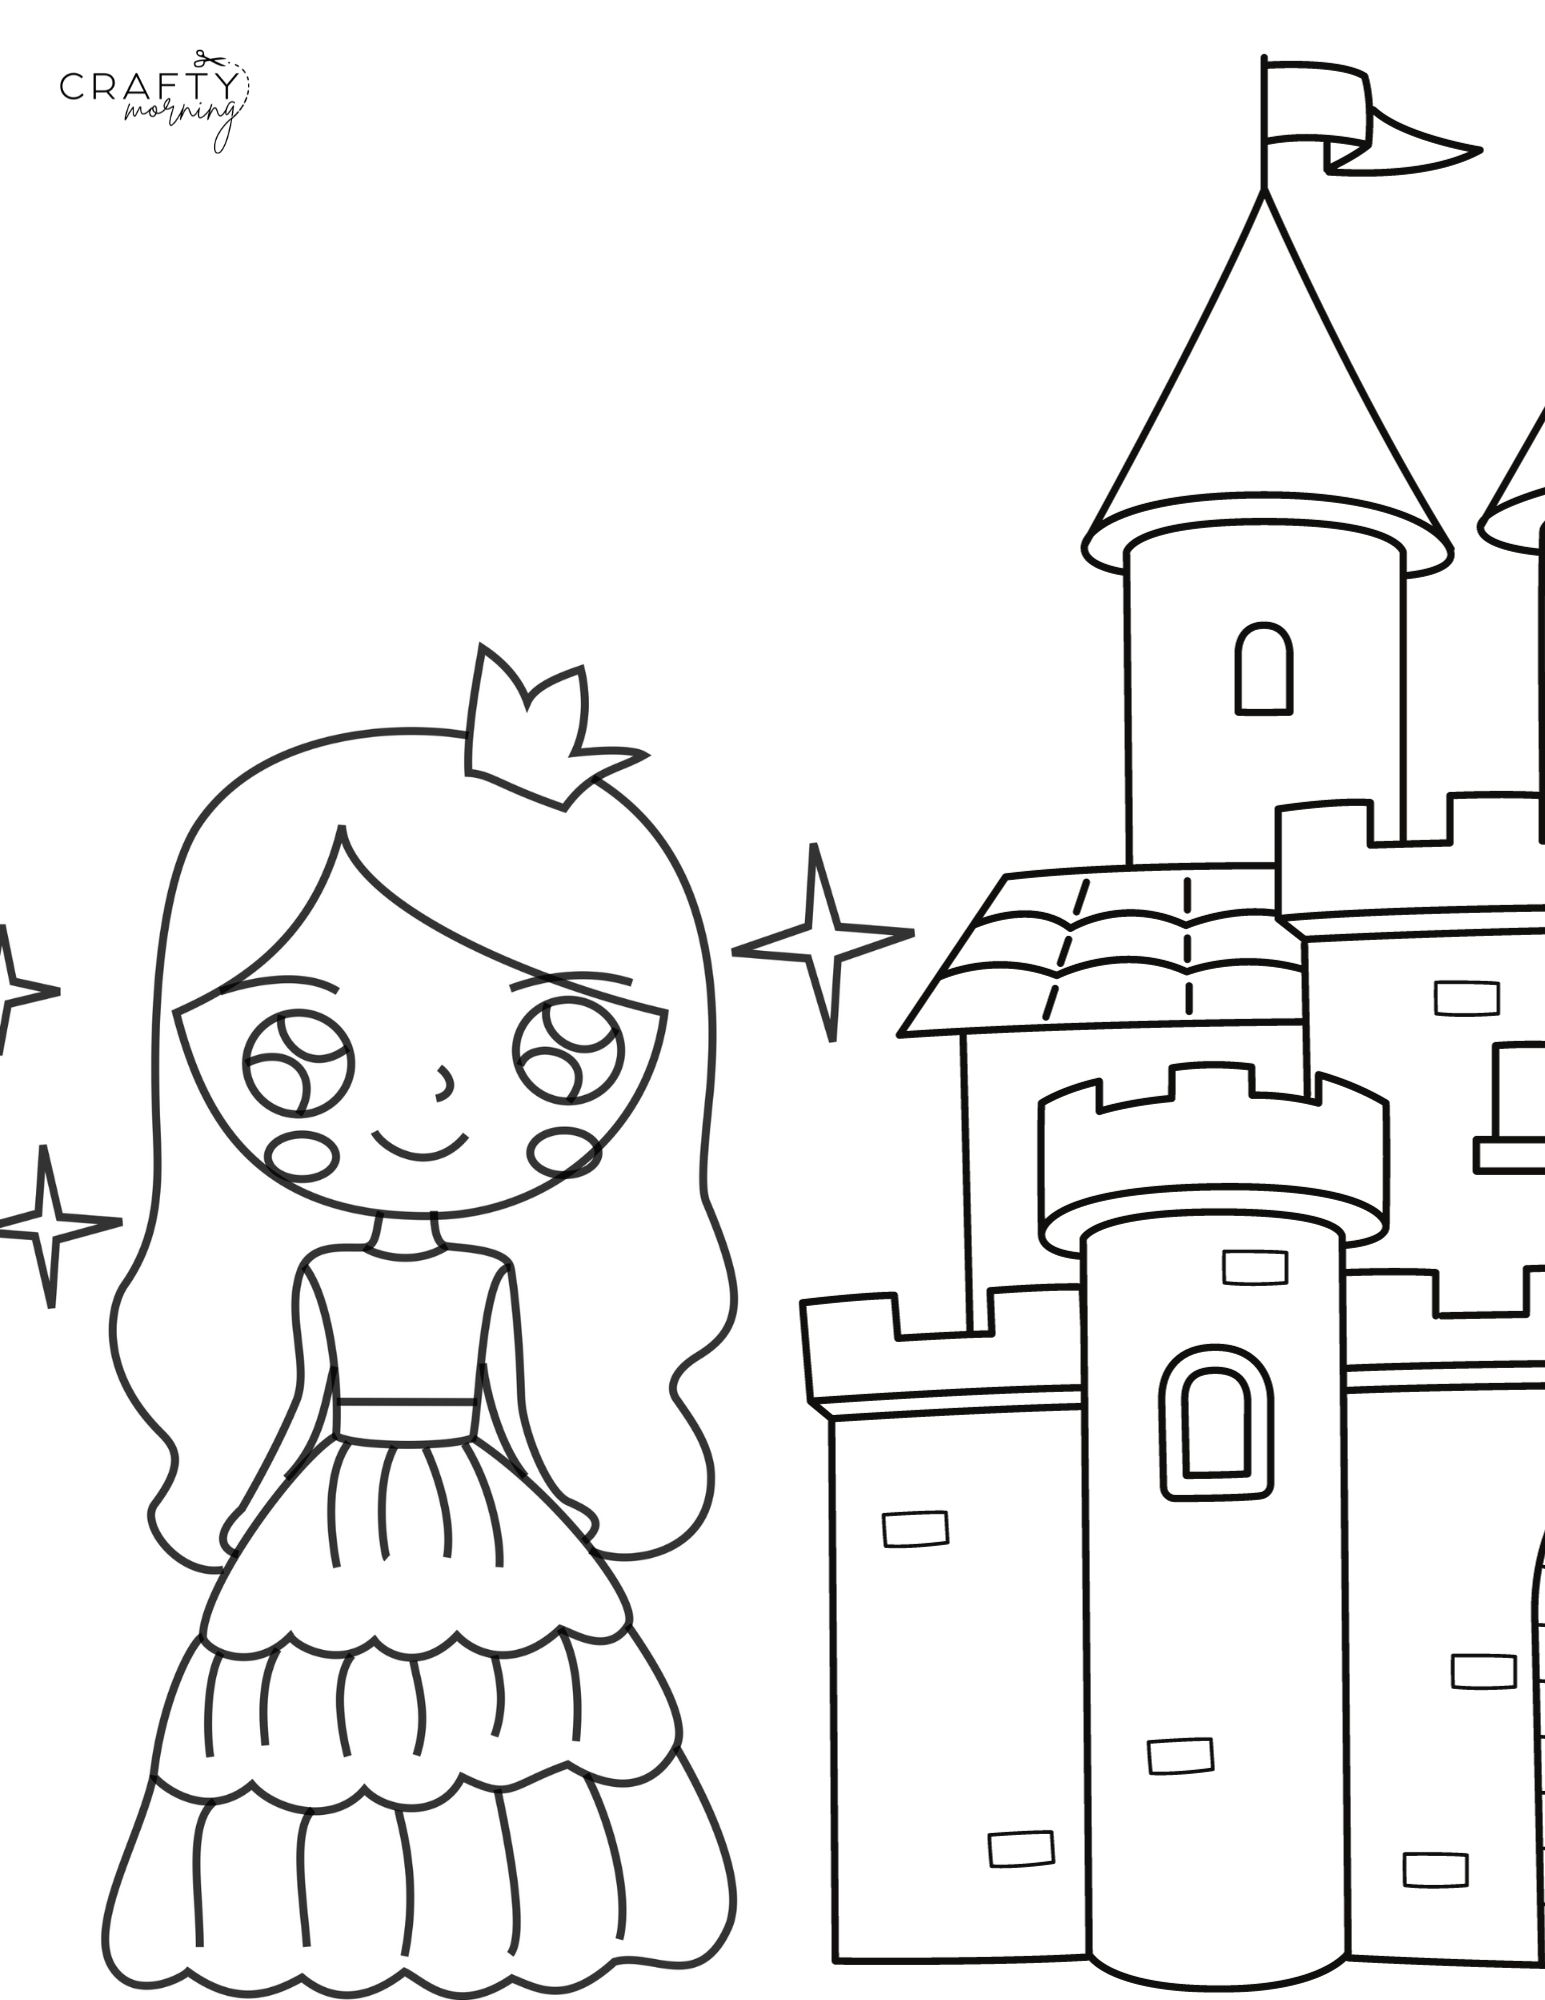 Cartoon Princess Coloring Book Whimsical Forest Adventure for Kids | MUSE AI